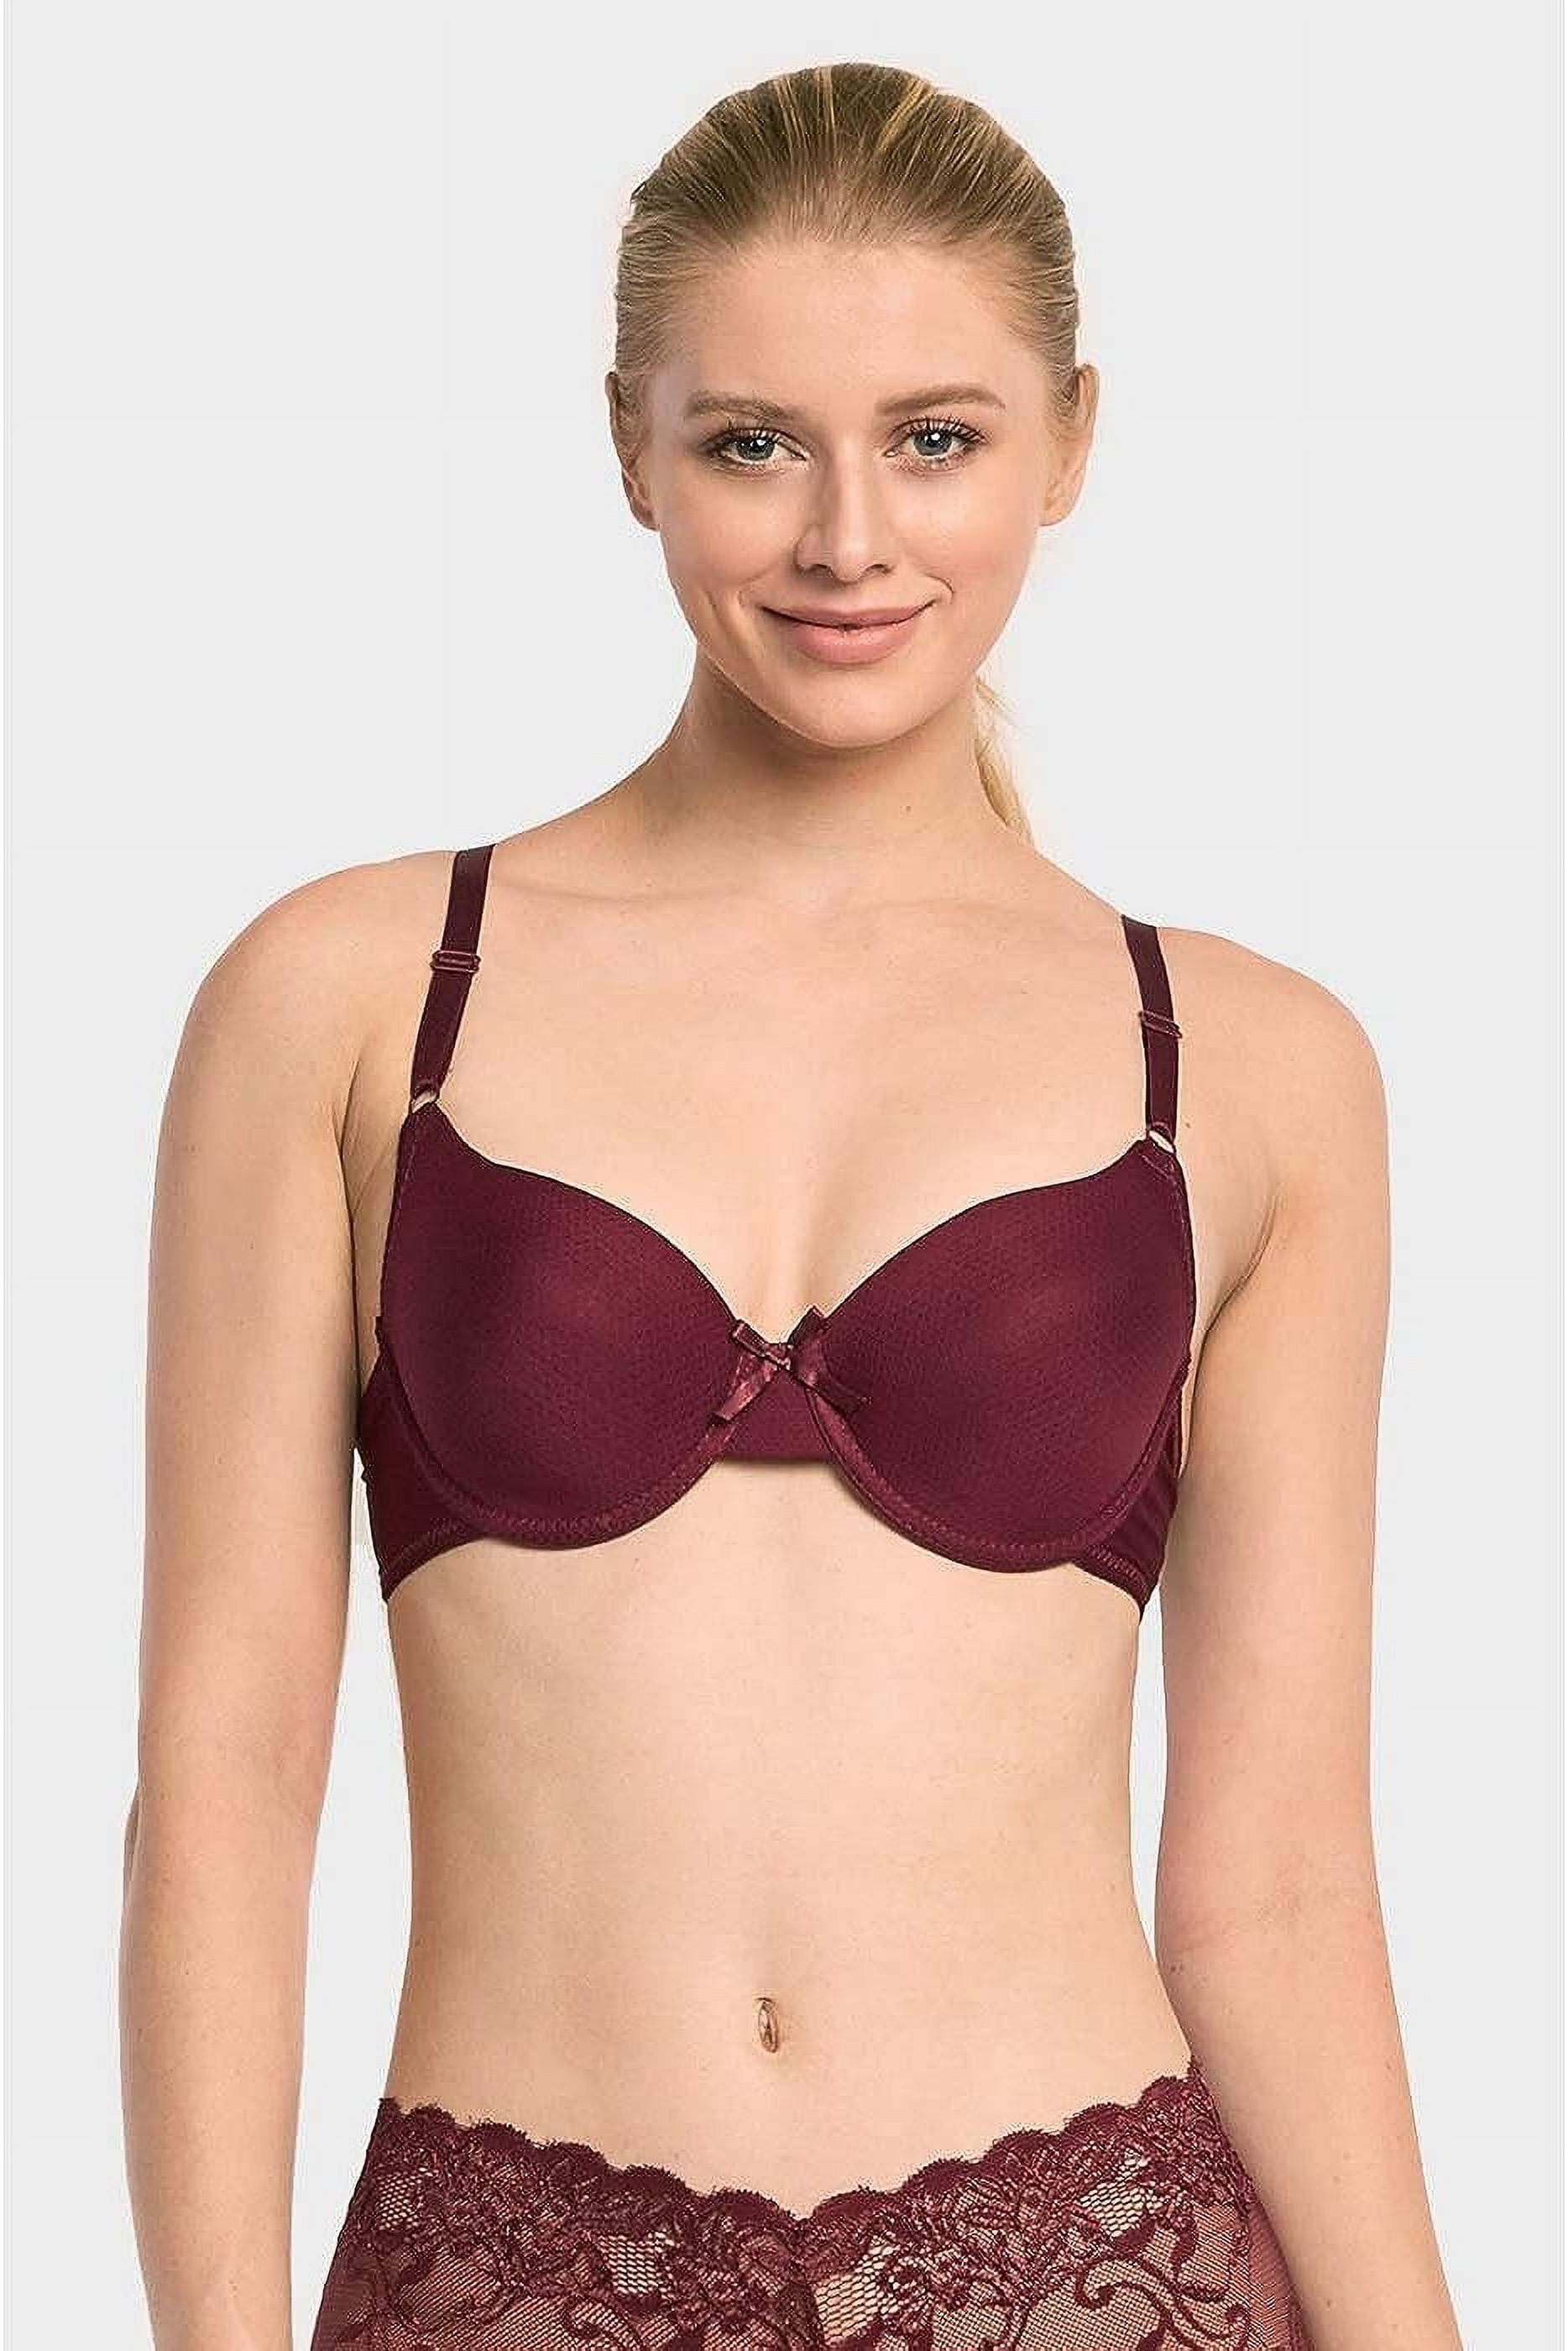 Mamia Sofra Women's Plain Lace Cotton Bras Pack of 6 - 4279PL1, 34B 